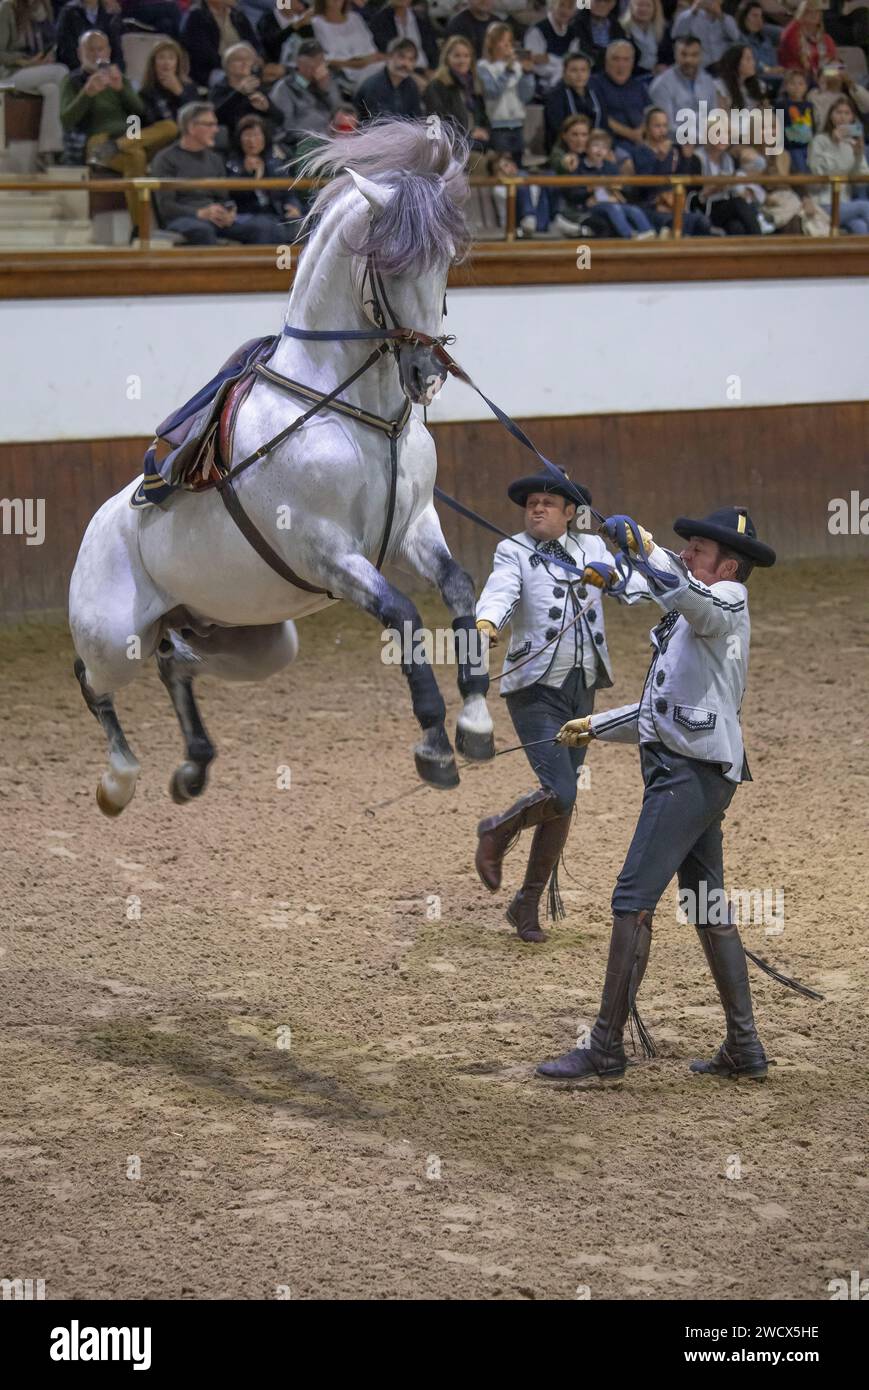 Spain, Andalusia, Jerez de la Frontera, Andalusian royal school of equestrian art, riders in Goyesque costume alongside a white horse performing a caper during an exhibition show of doma vaquera, the art of Andalusian dressage Stock Photo